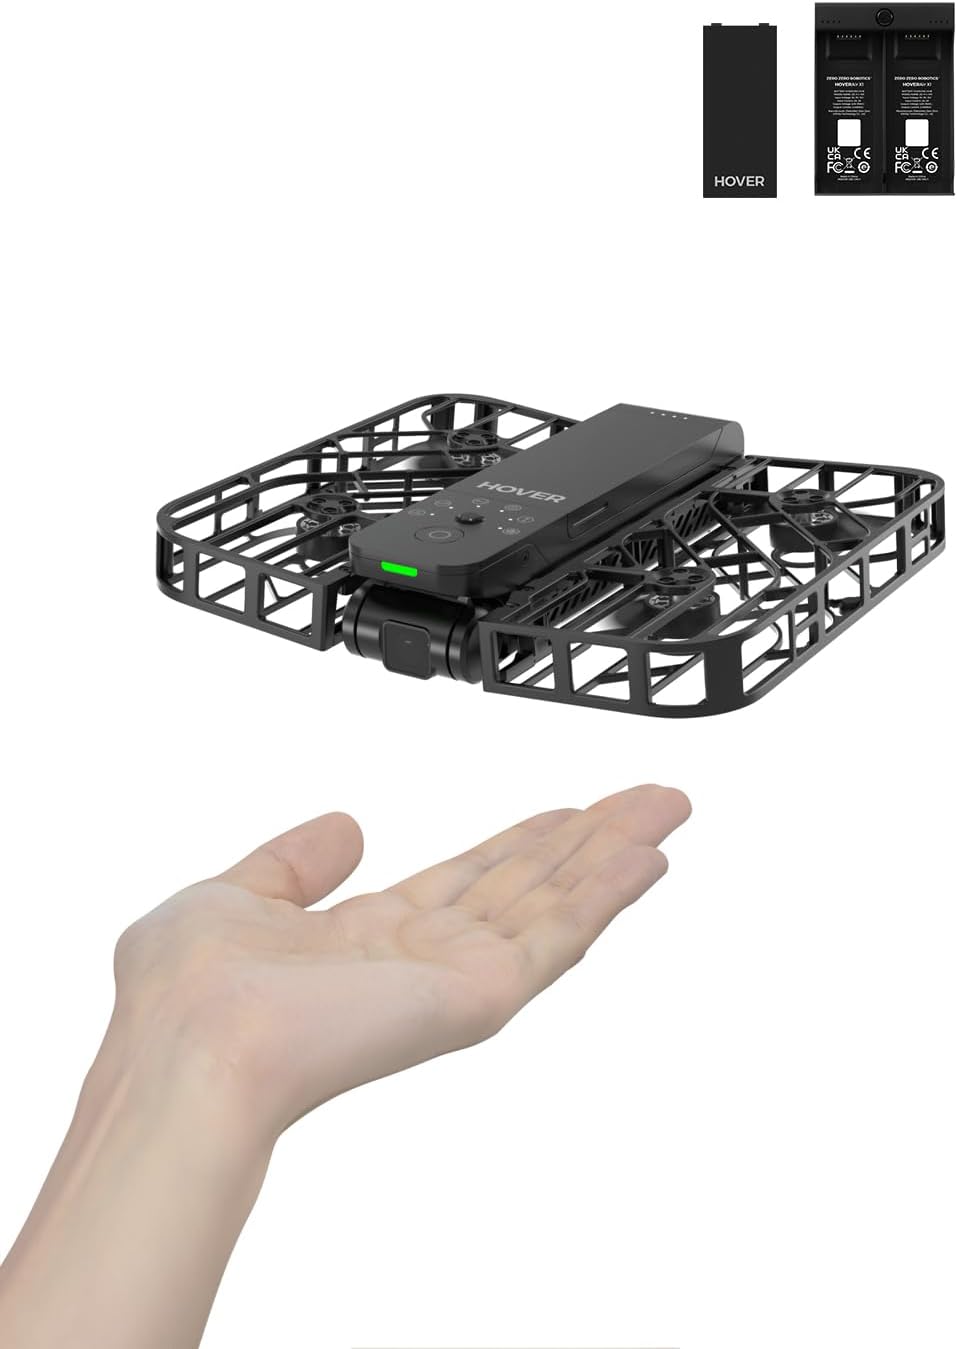 This image features a compact, HoverAir X1 Drone with a protective frame around its propellers. The drone is hovering above an open human hand, indicating its small size and the ability to take off or land on a palm.